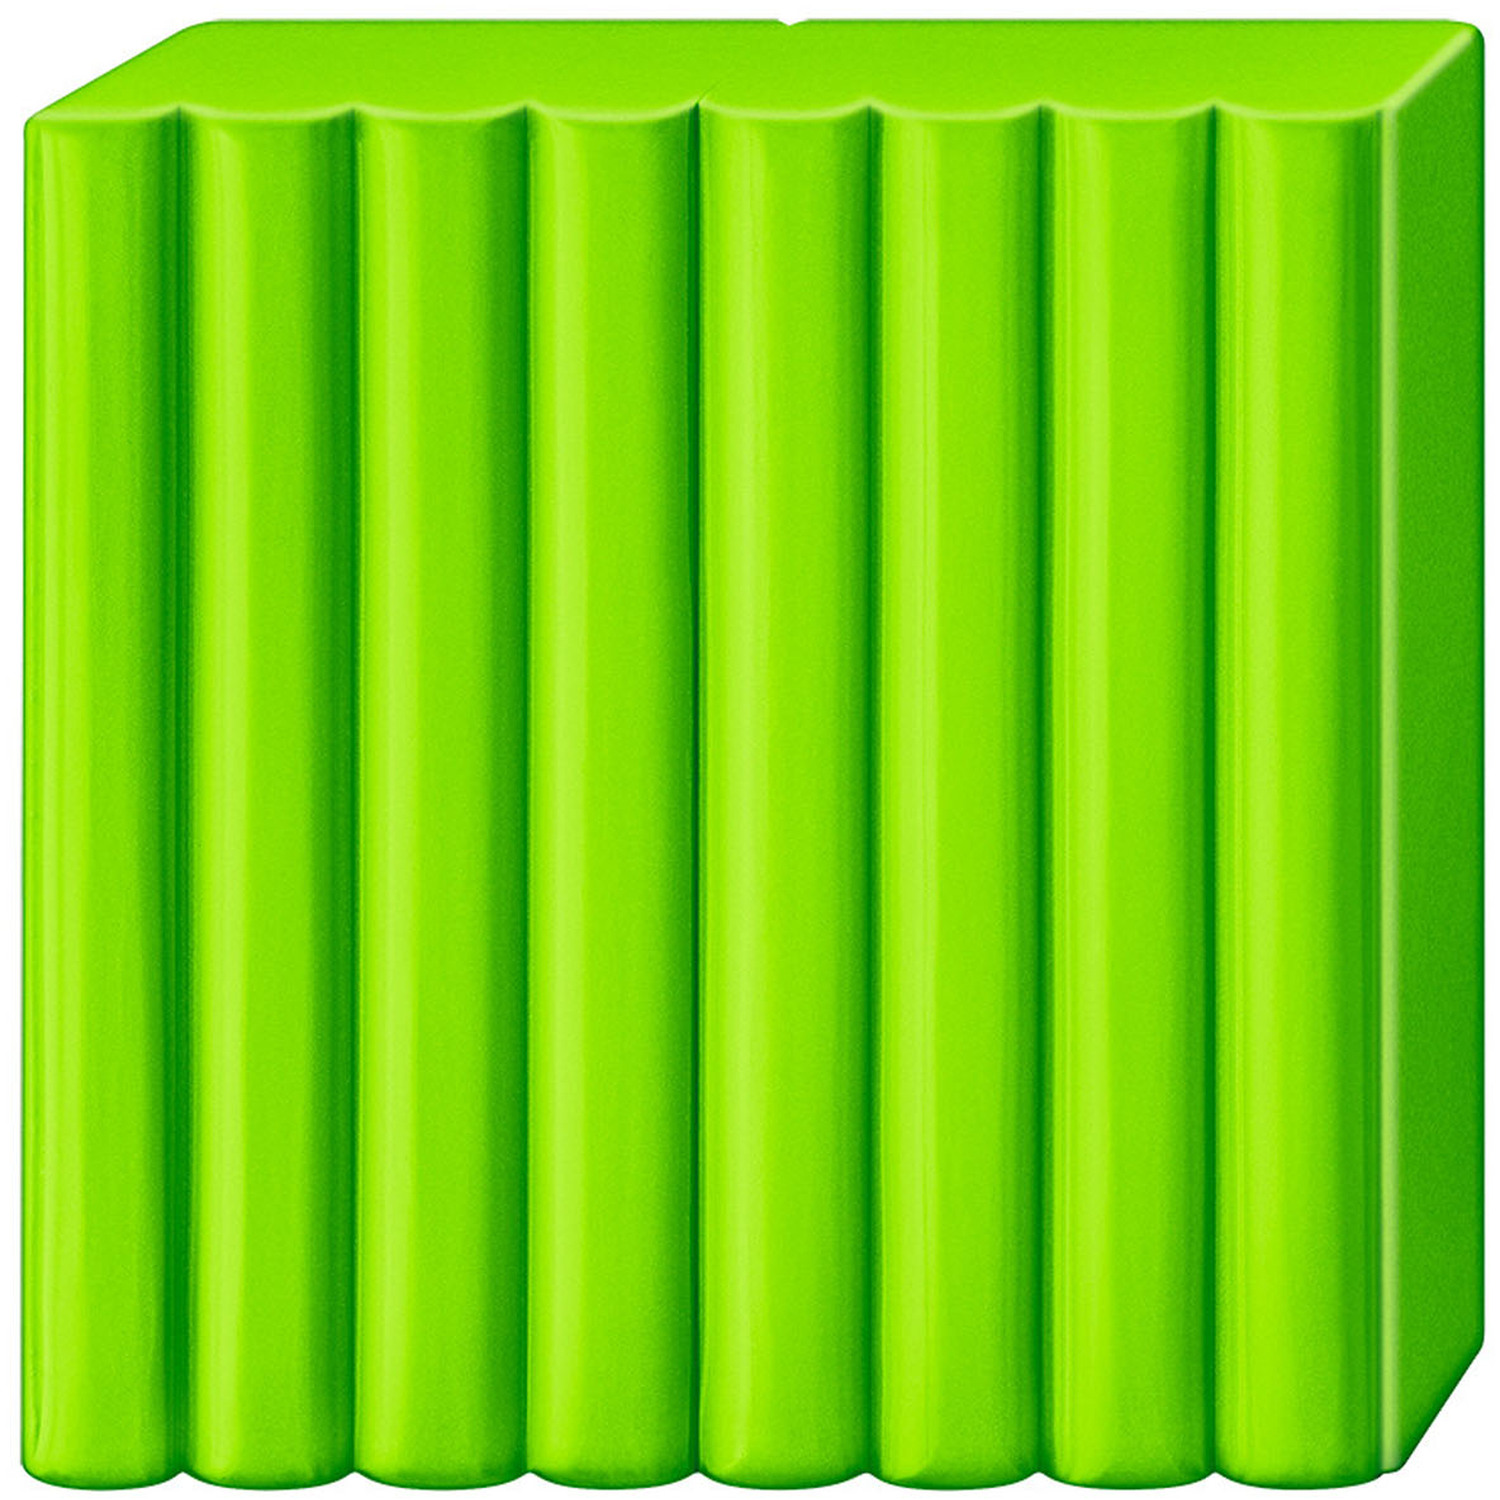 Staedtler FIMO Soft Modelling Clay Block - Apple Green Image 2